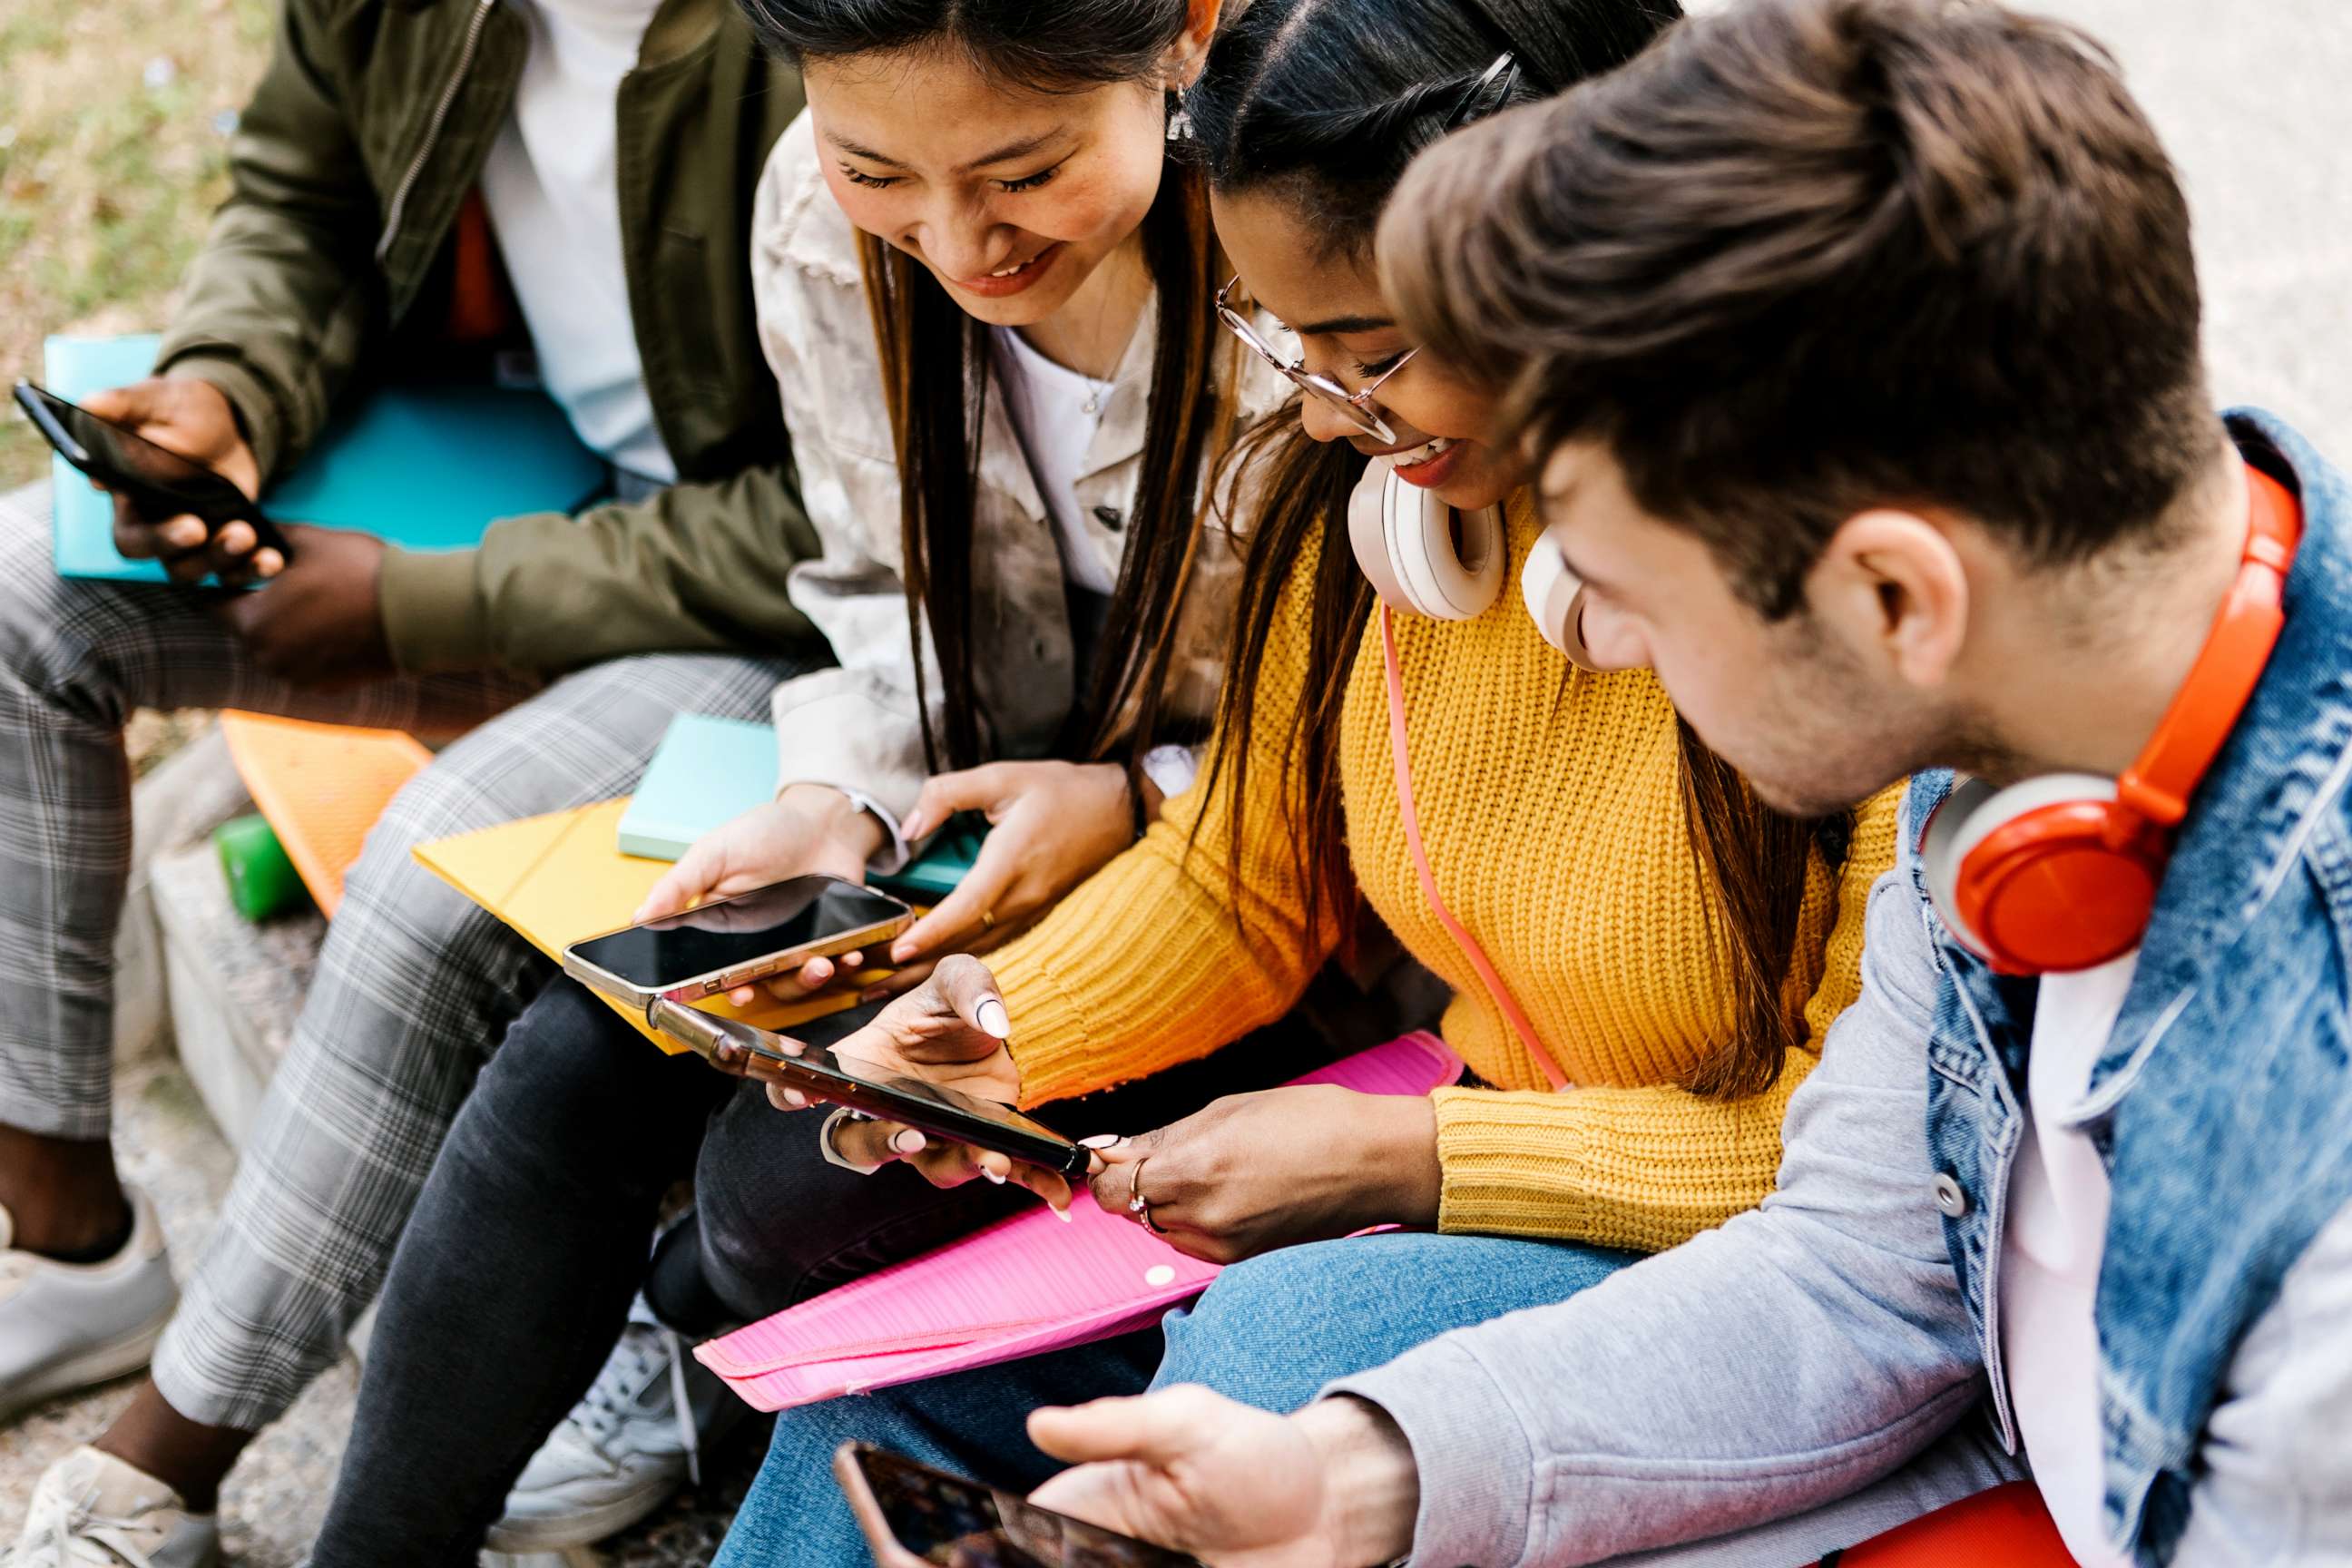 PHOTO: In this stock photo, teens are shown looking at their phones.